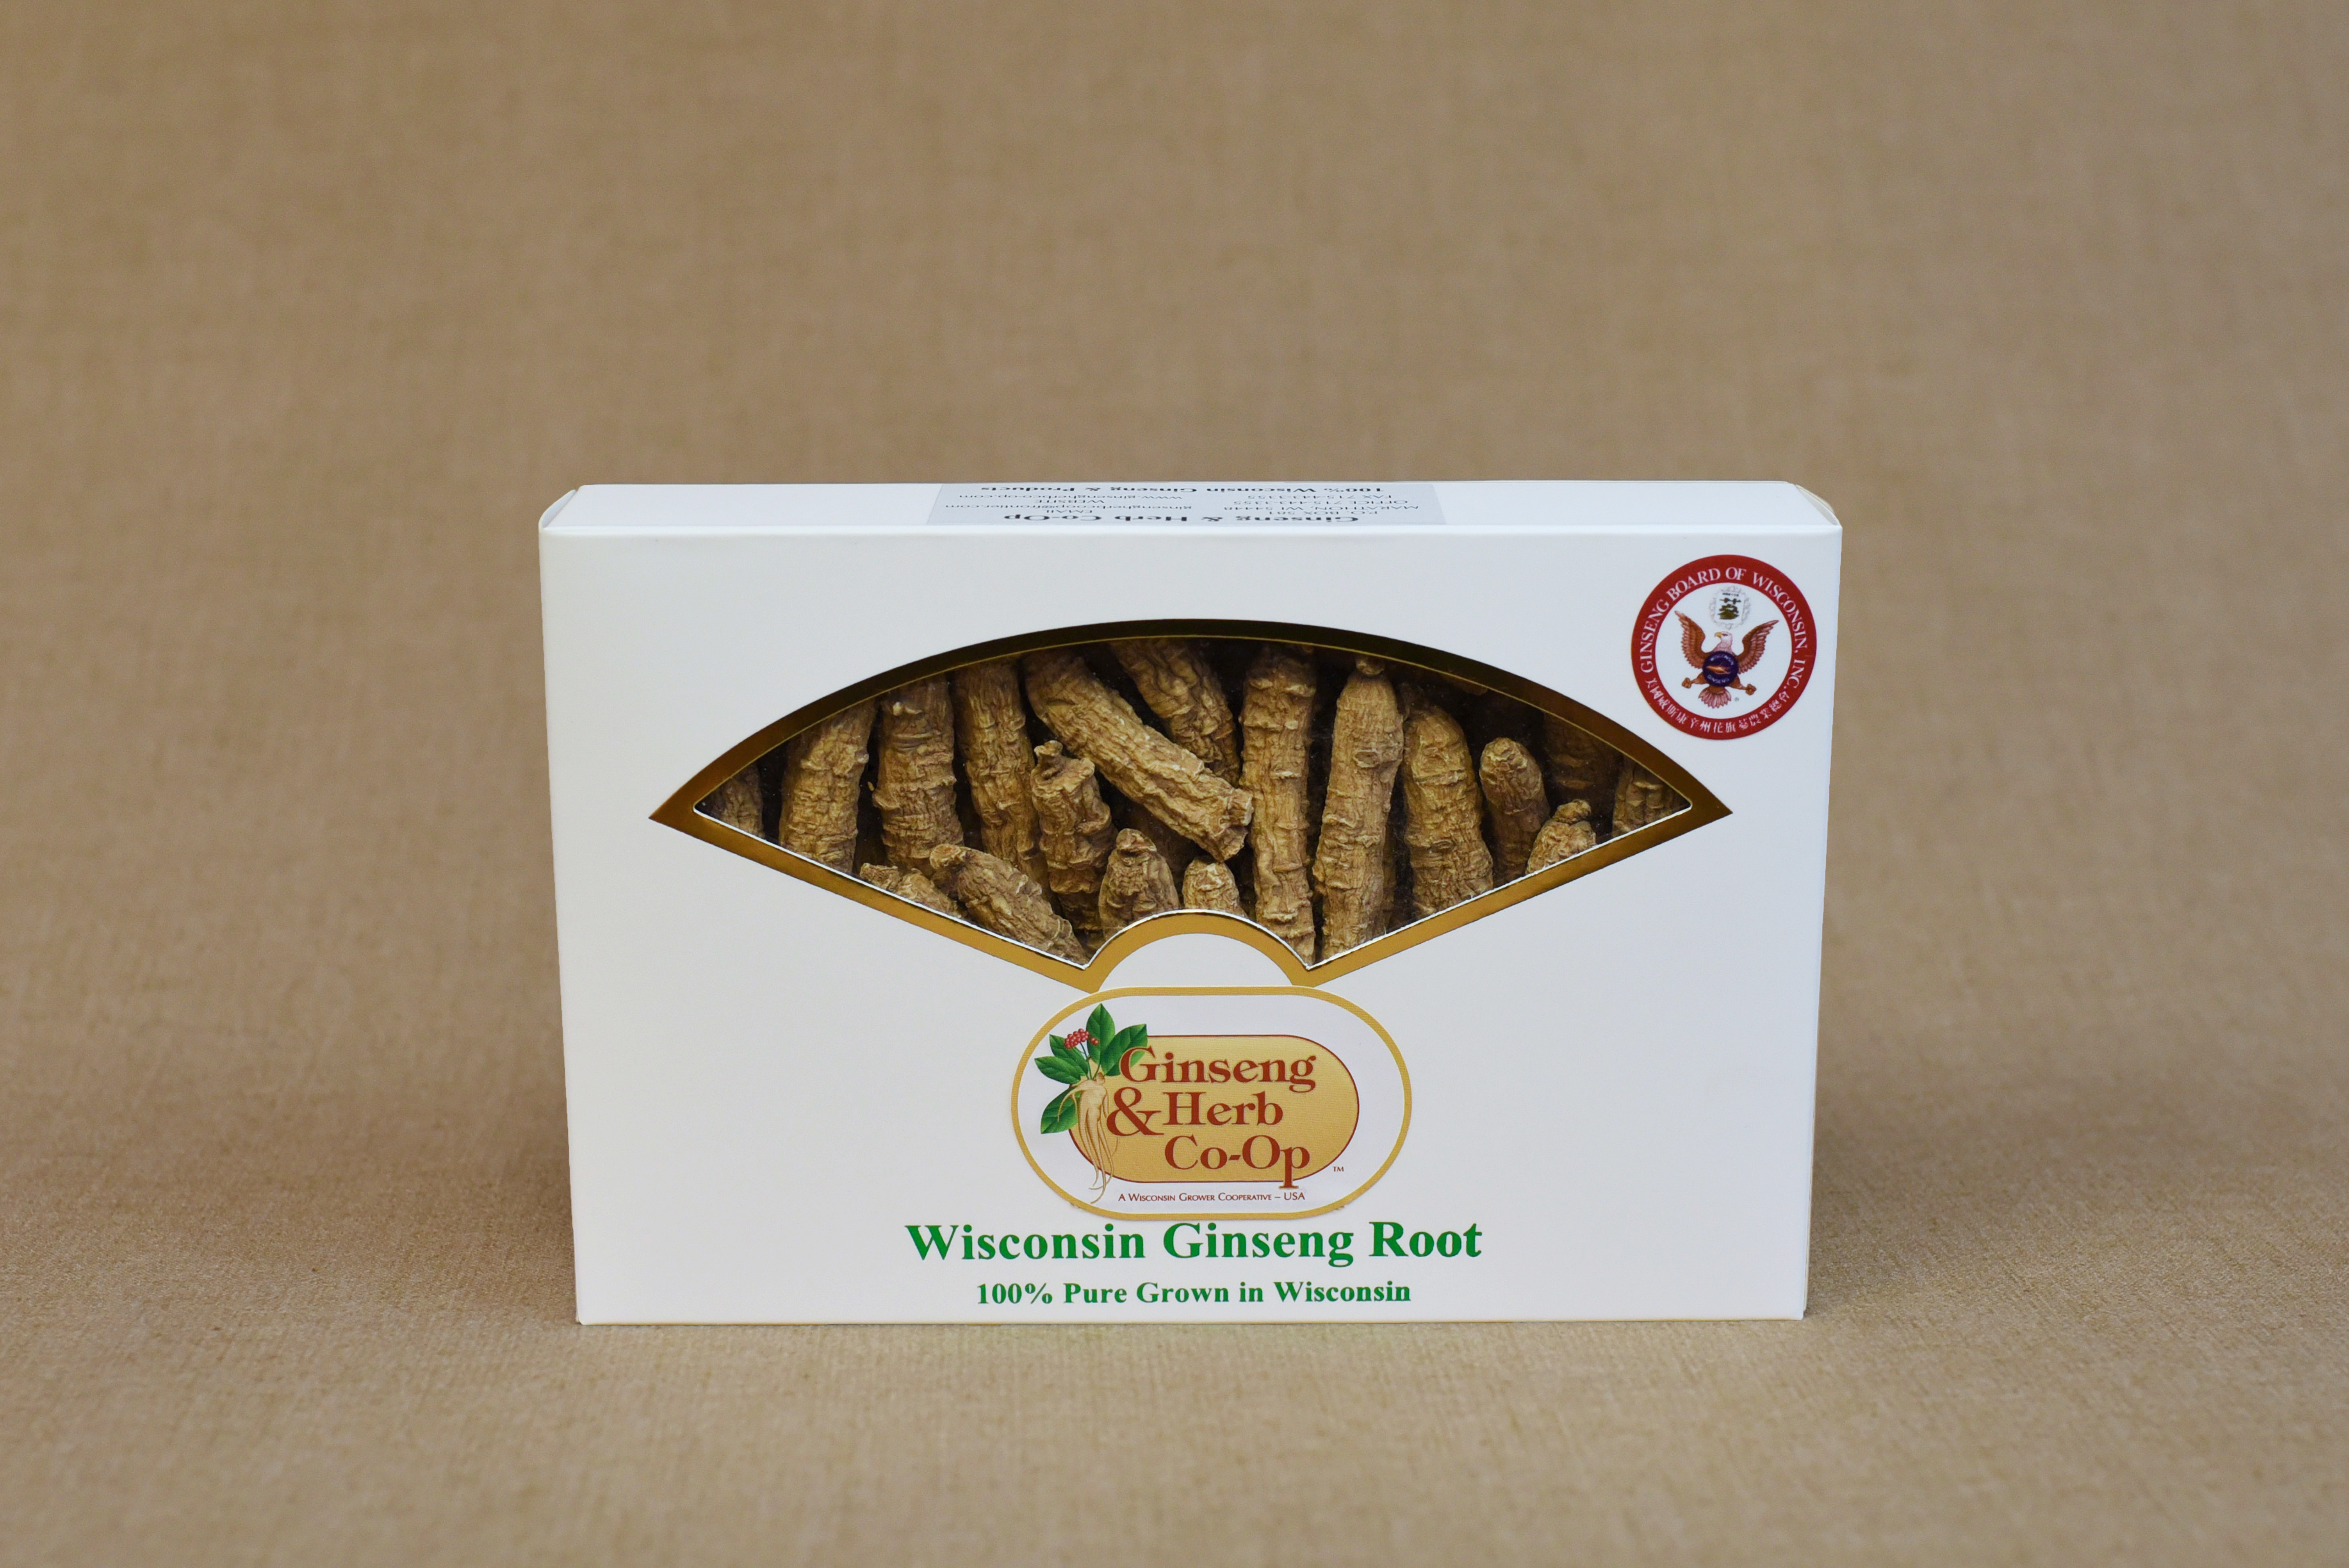 Buy Now! high quality Wisconsin Ginseng roots in Eau Claire, WI